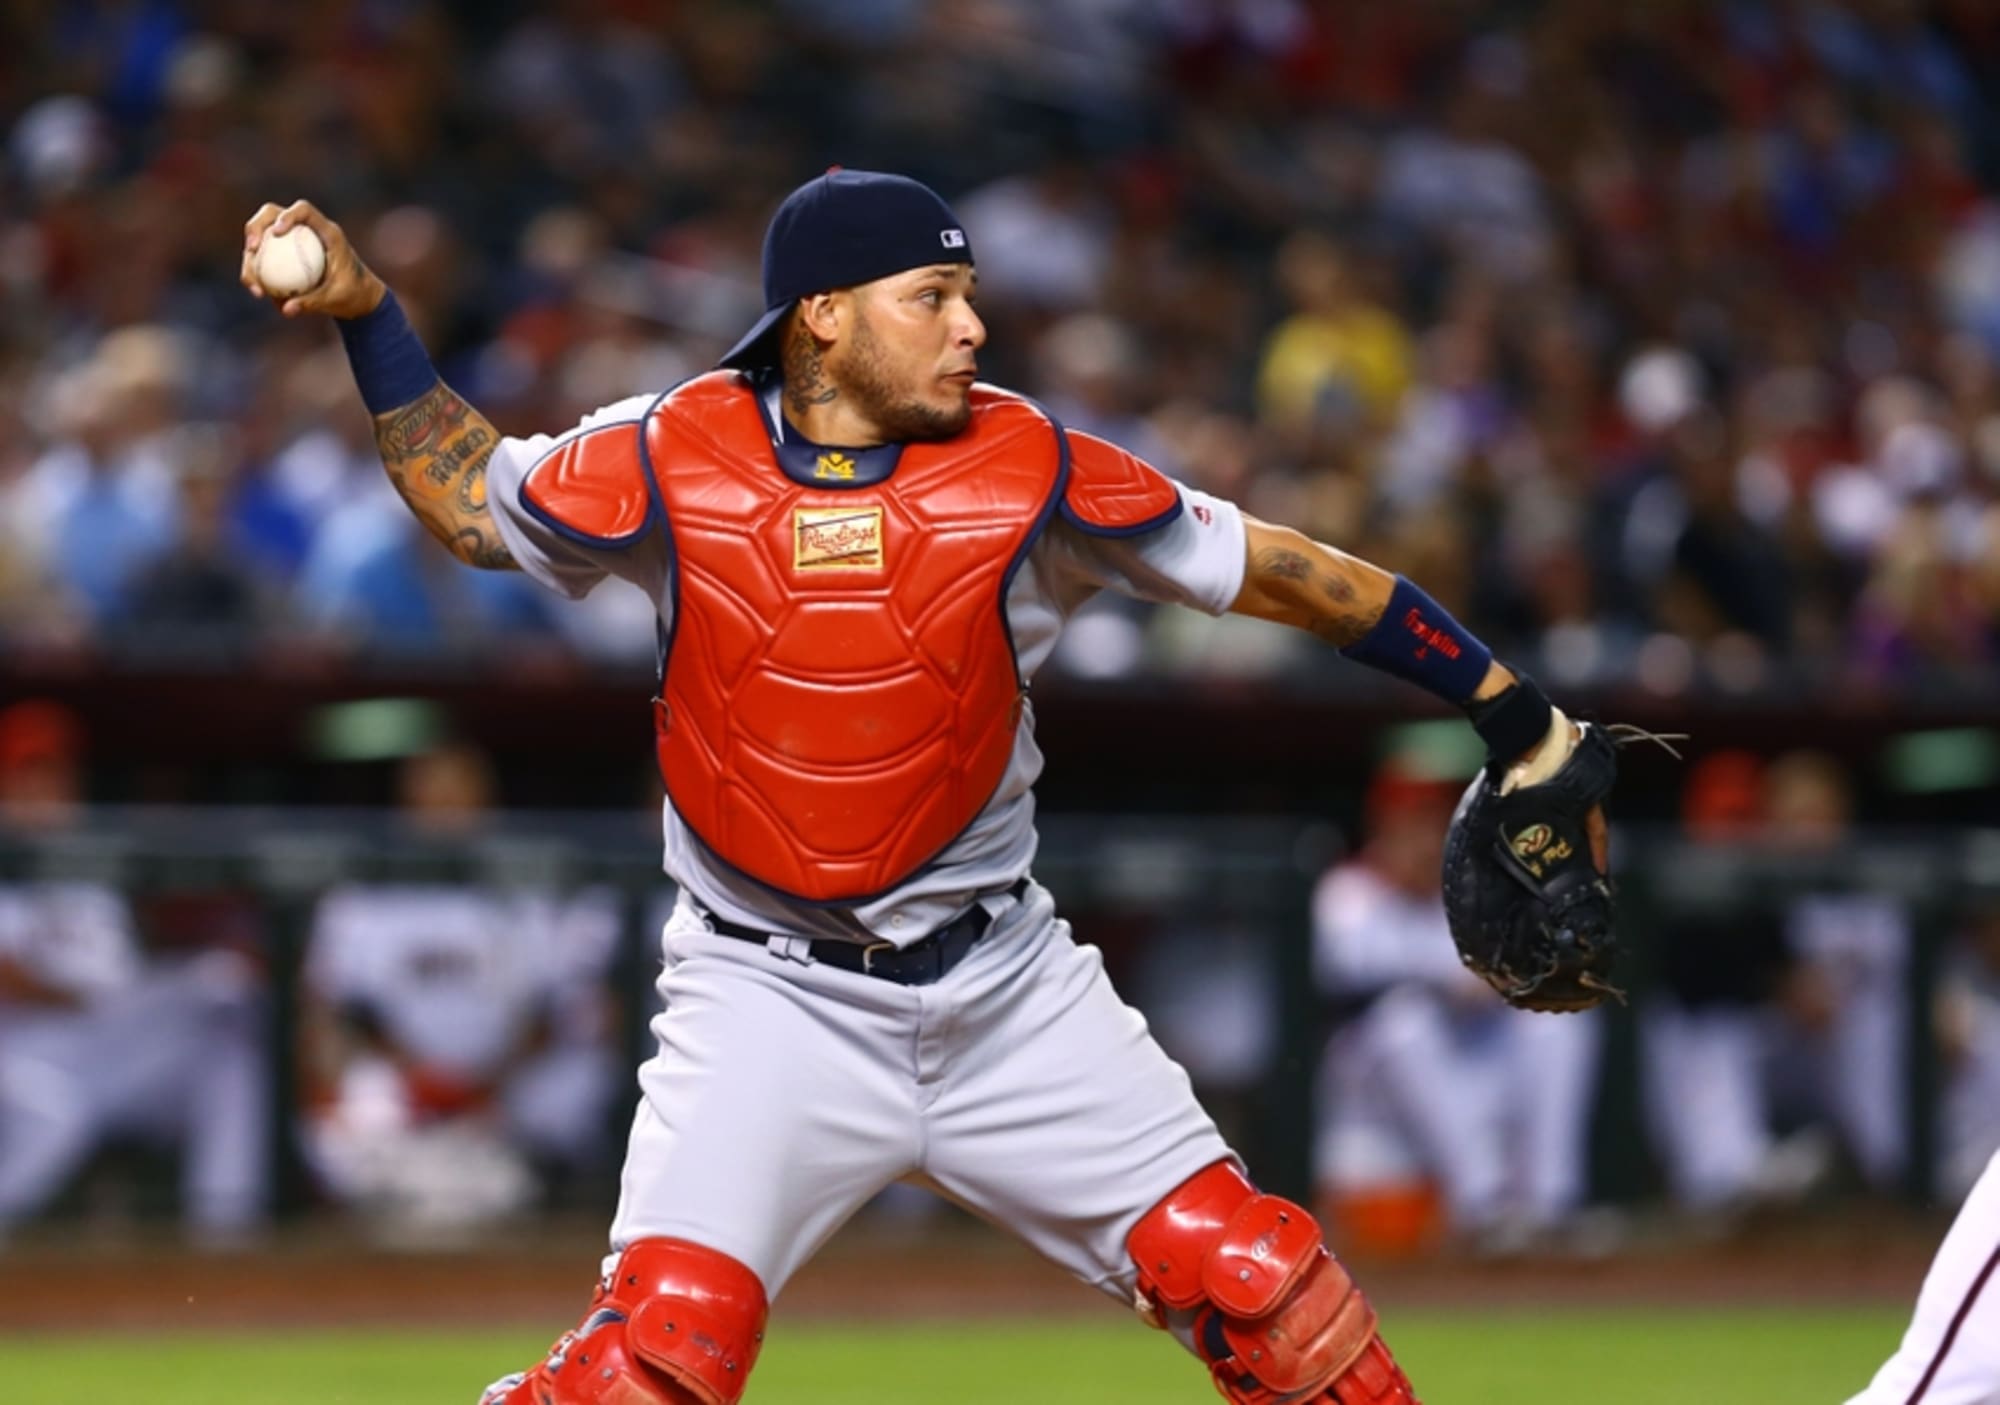 St. Louis Cardinals: Yadier Molina may be playing too much